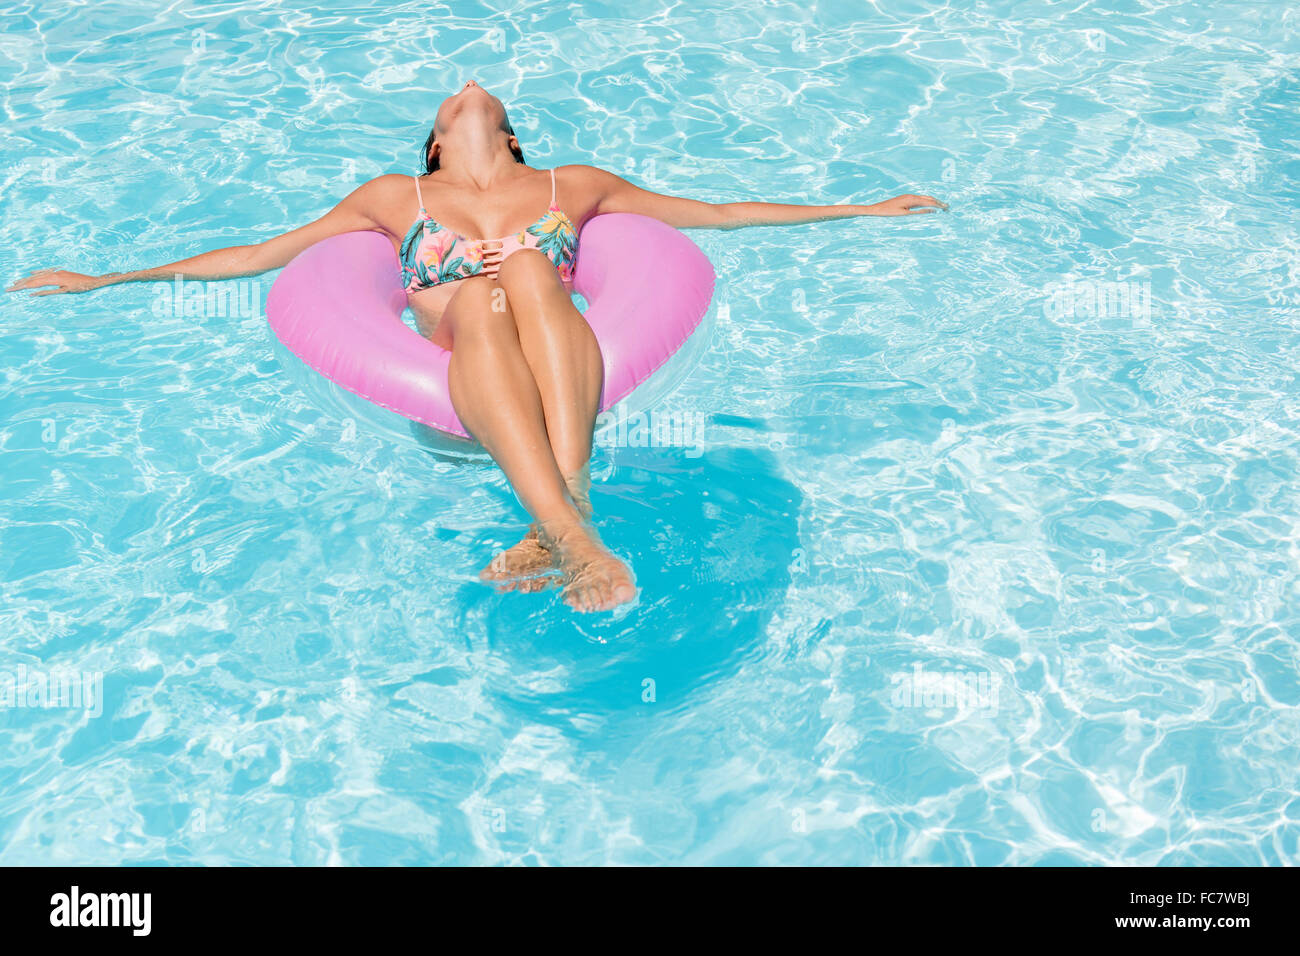 Caucasian woman floating in swimming pool Stock Photo